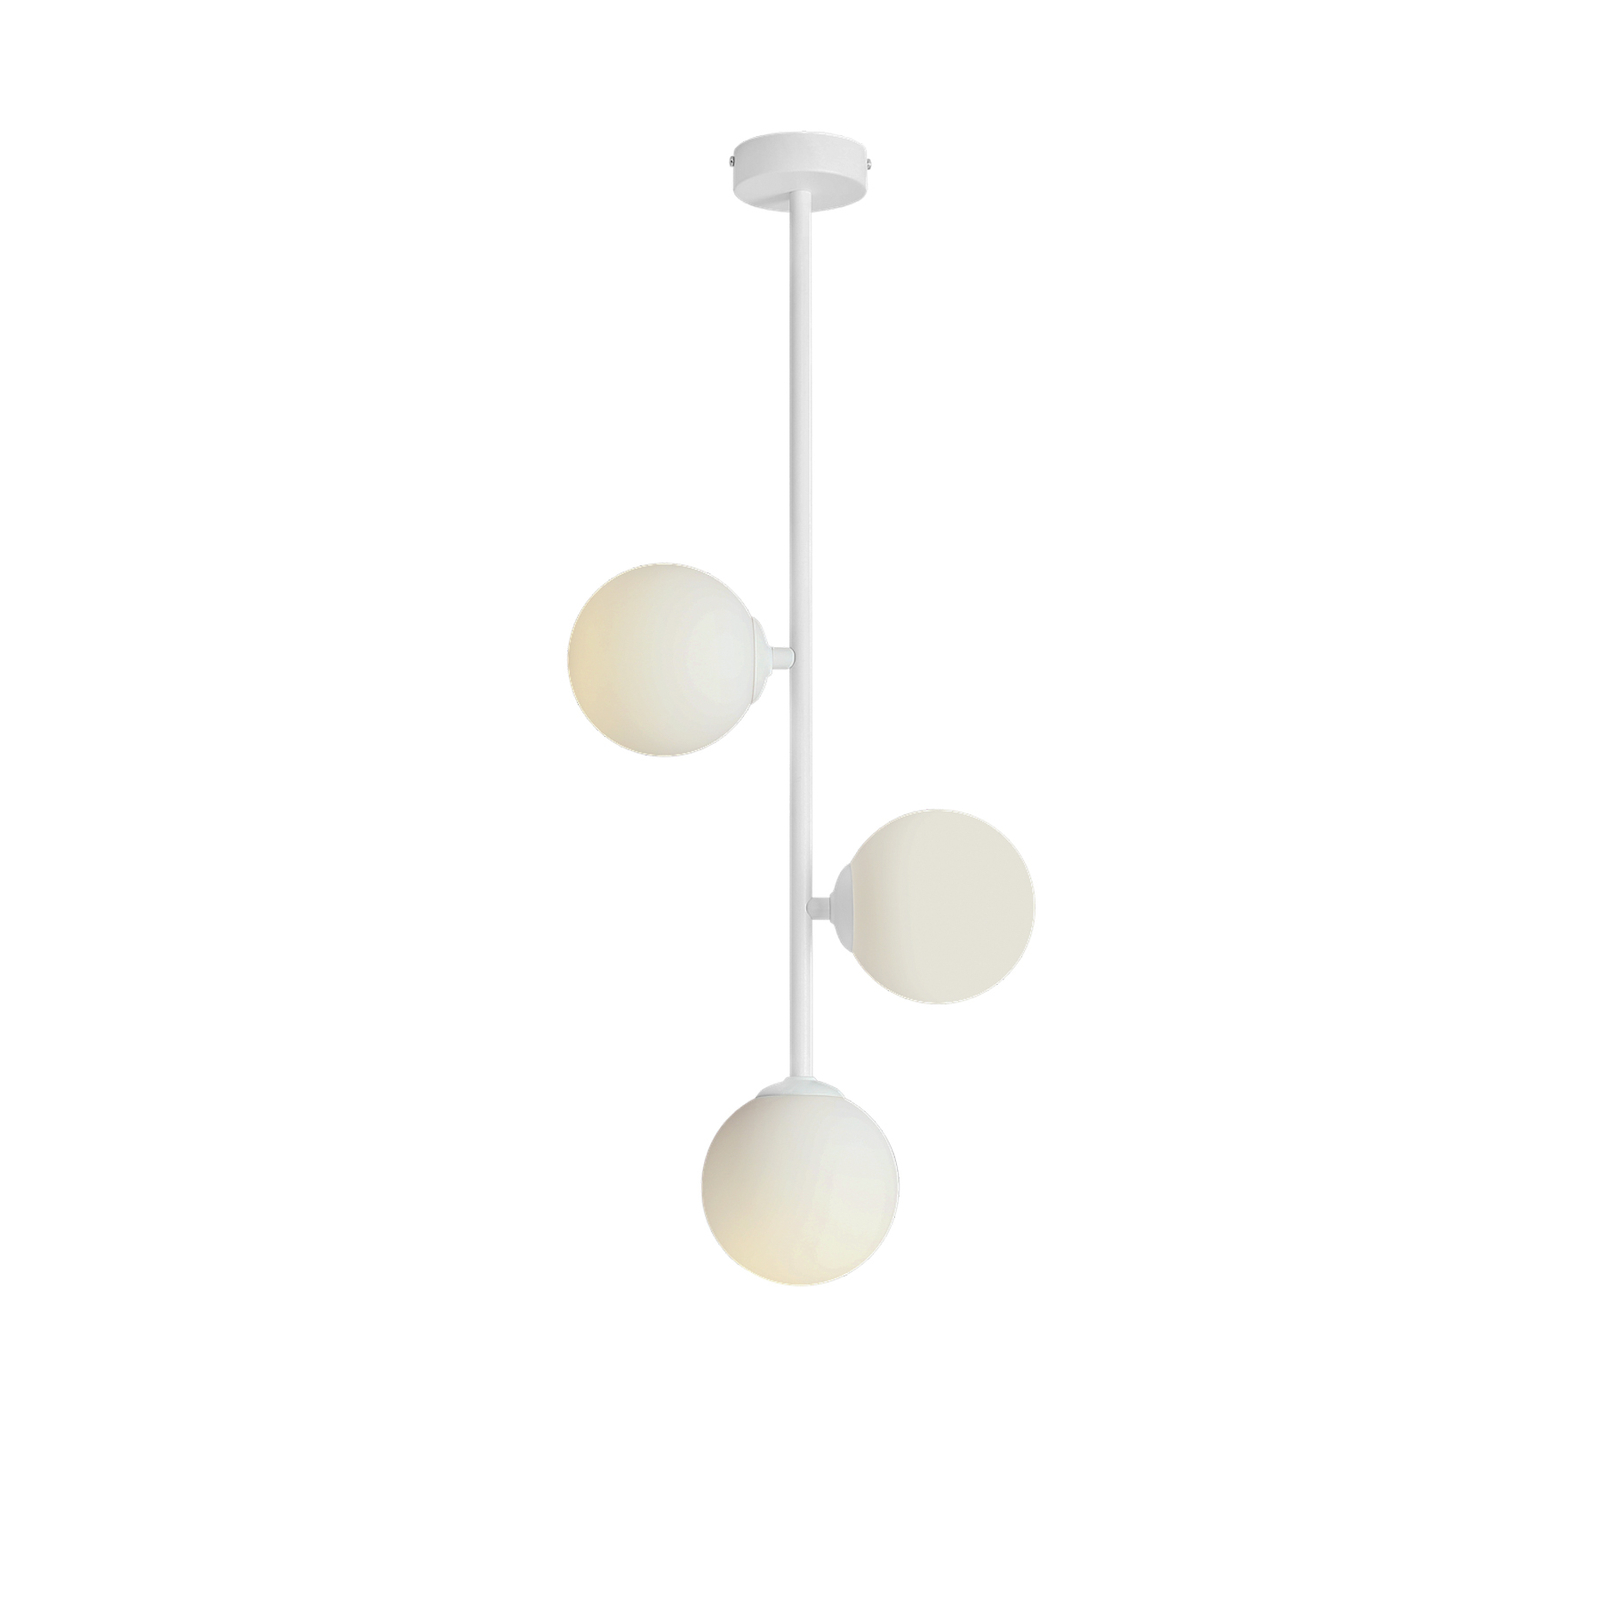 Dione ceiling light, 3-bulb, white